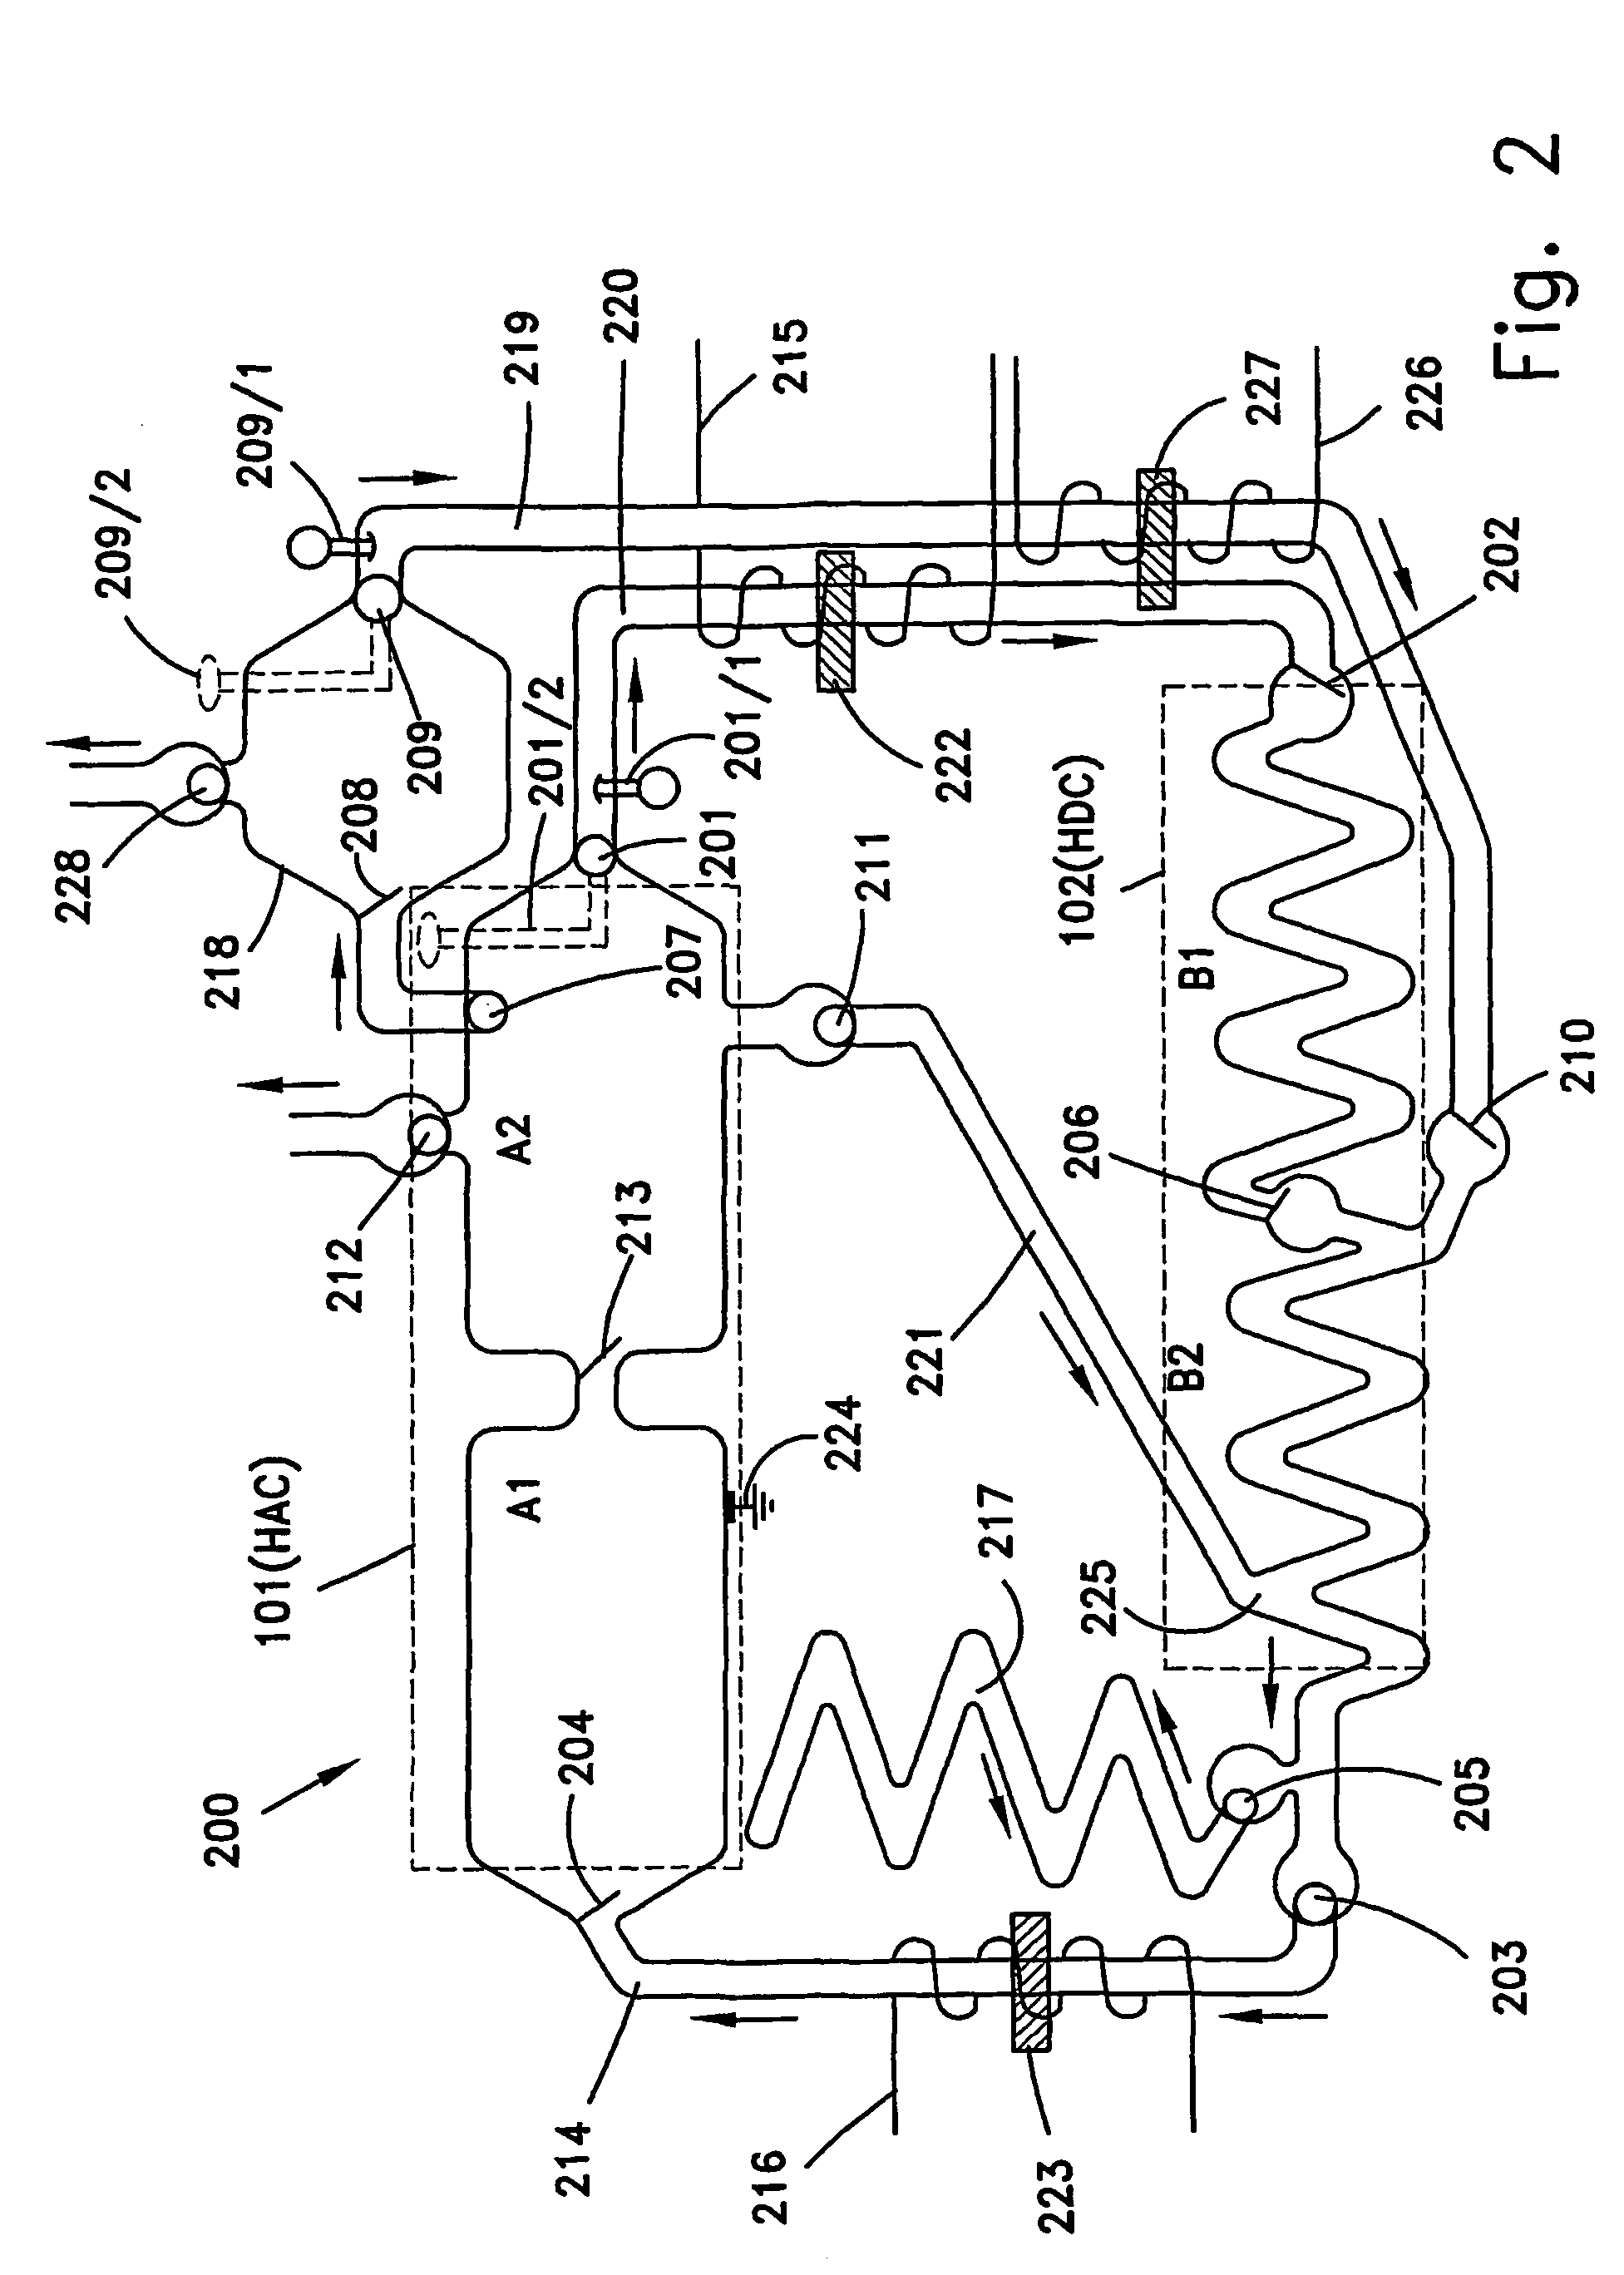 Thermal to electrical energy converter